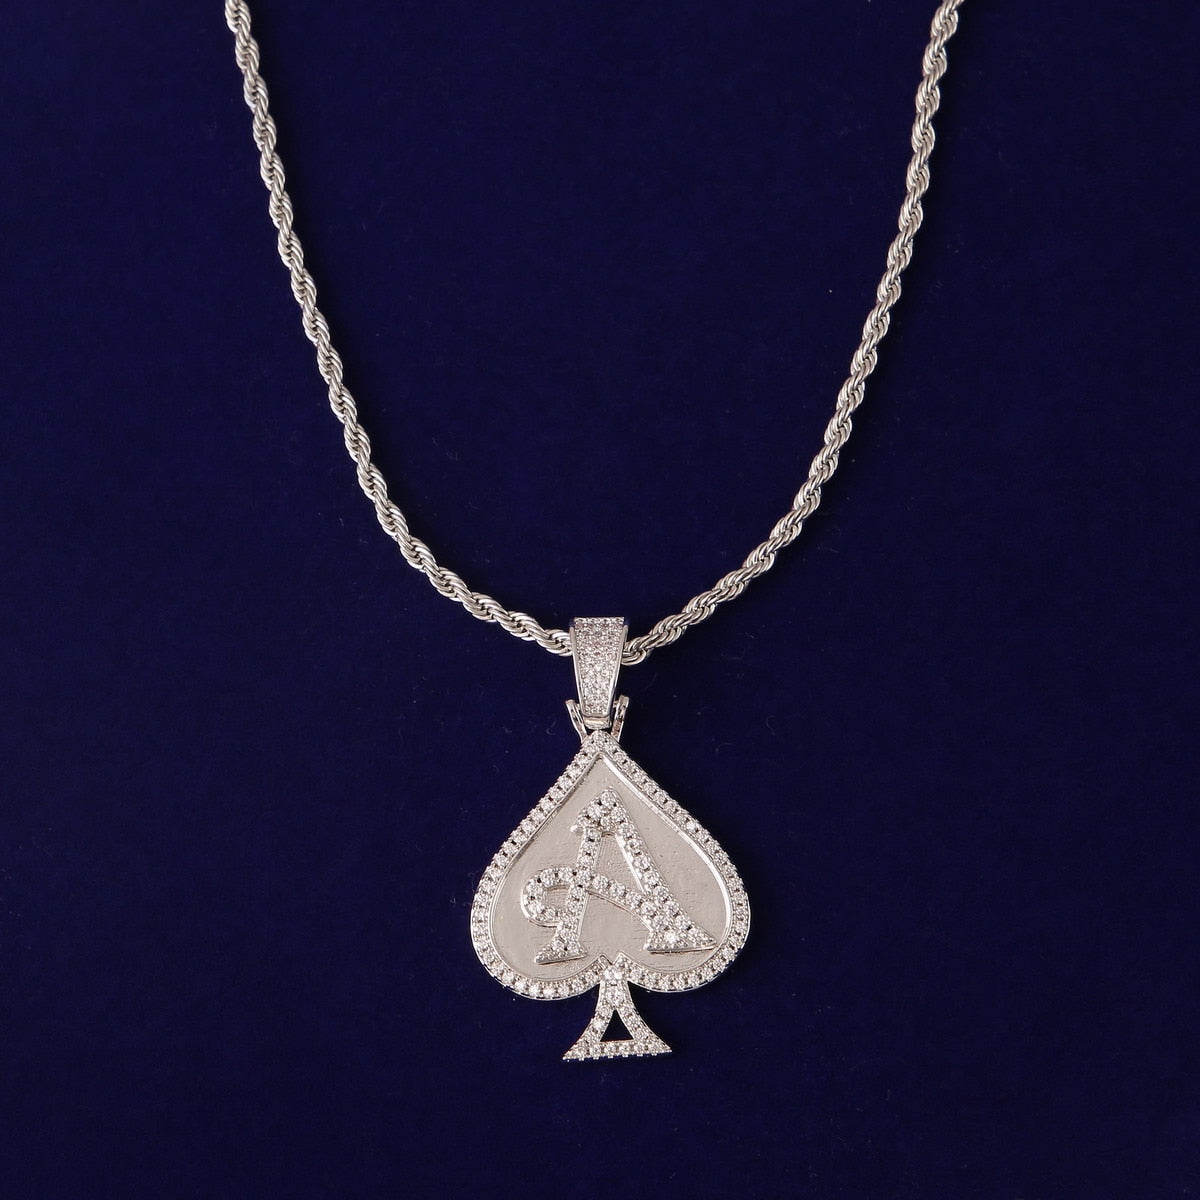 Pikes Ace Poker Pendant in Gold/White Gold/Rose Gold